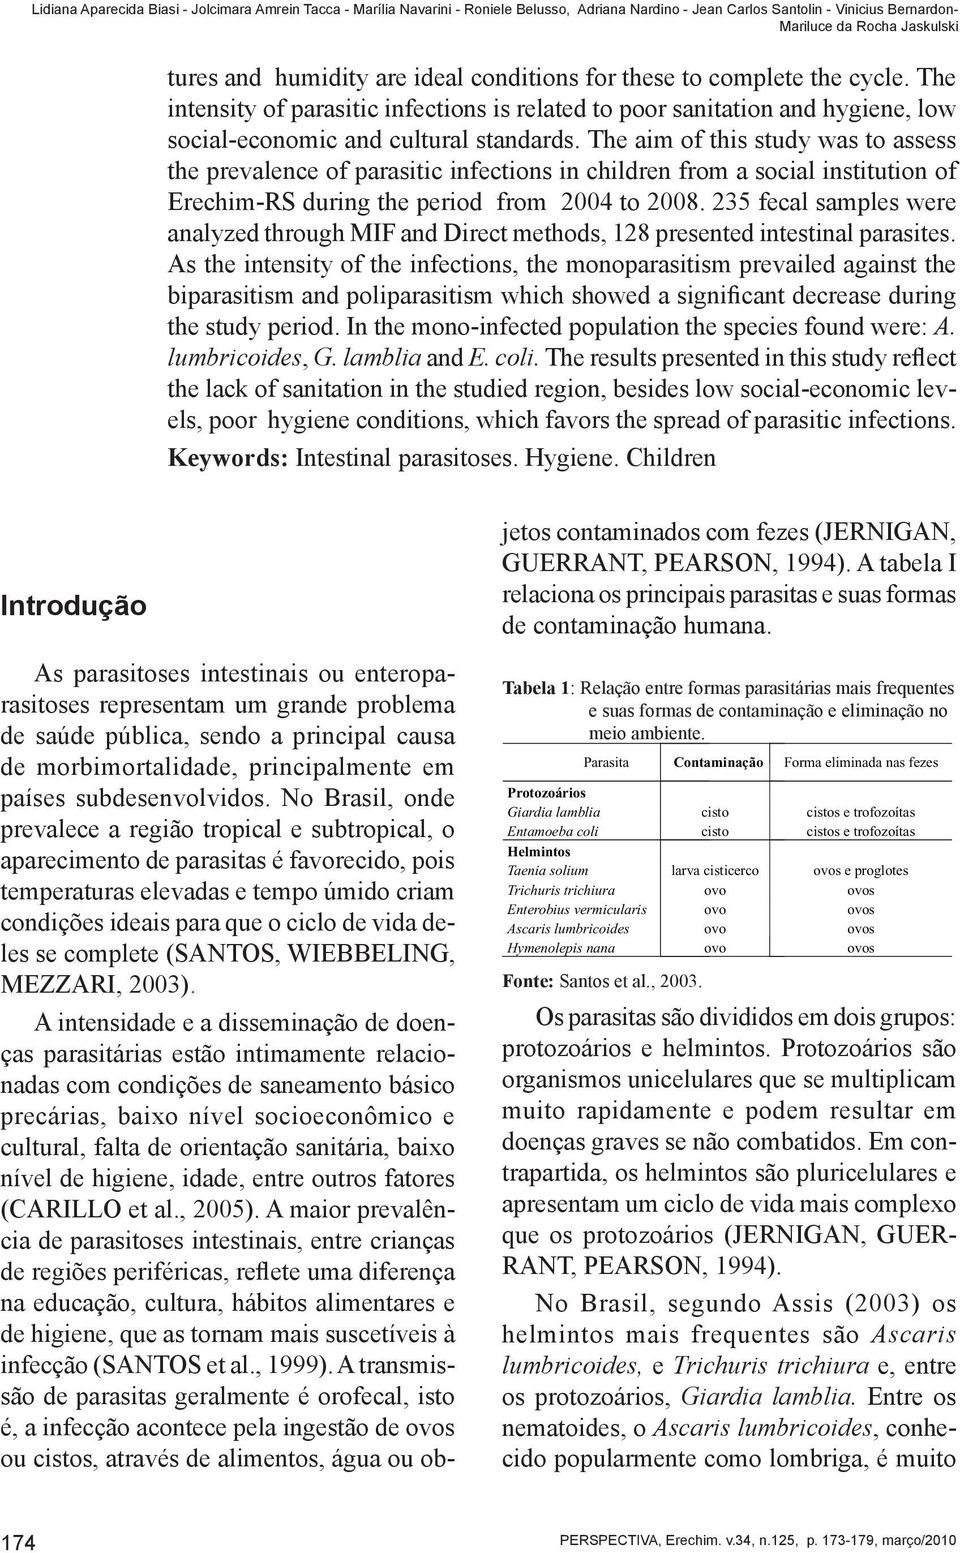 The aim of this study was to assess the prevalence of parasitic infections in children from a social institution of Erechim-RS during the period from 2004 to 2008.